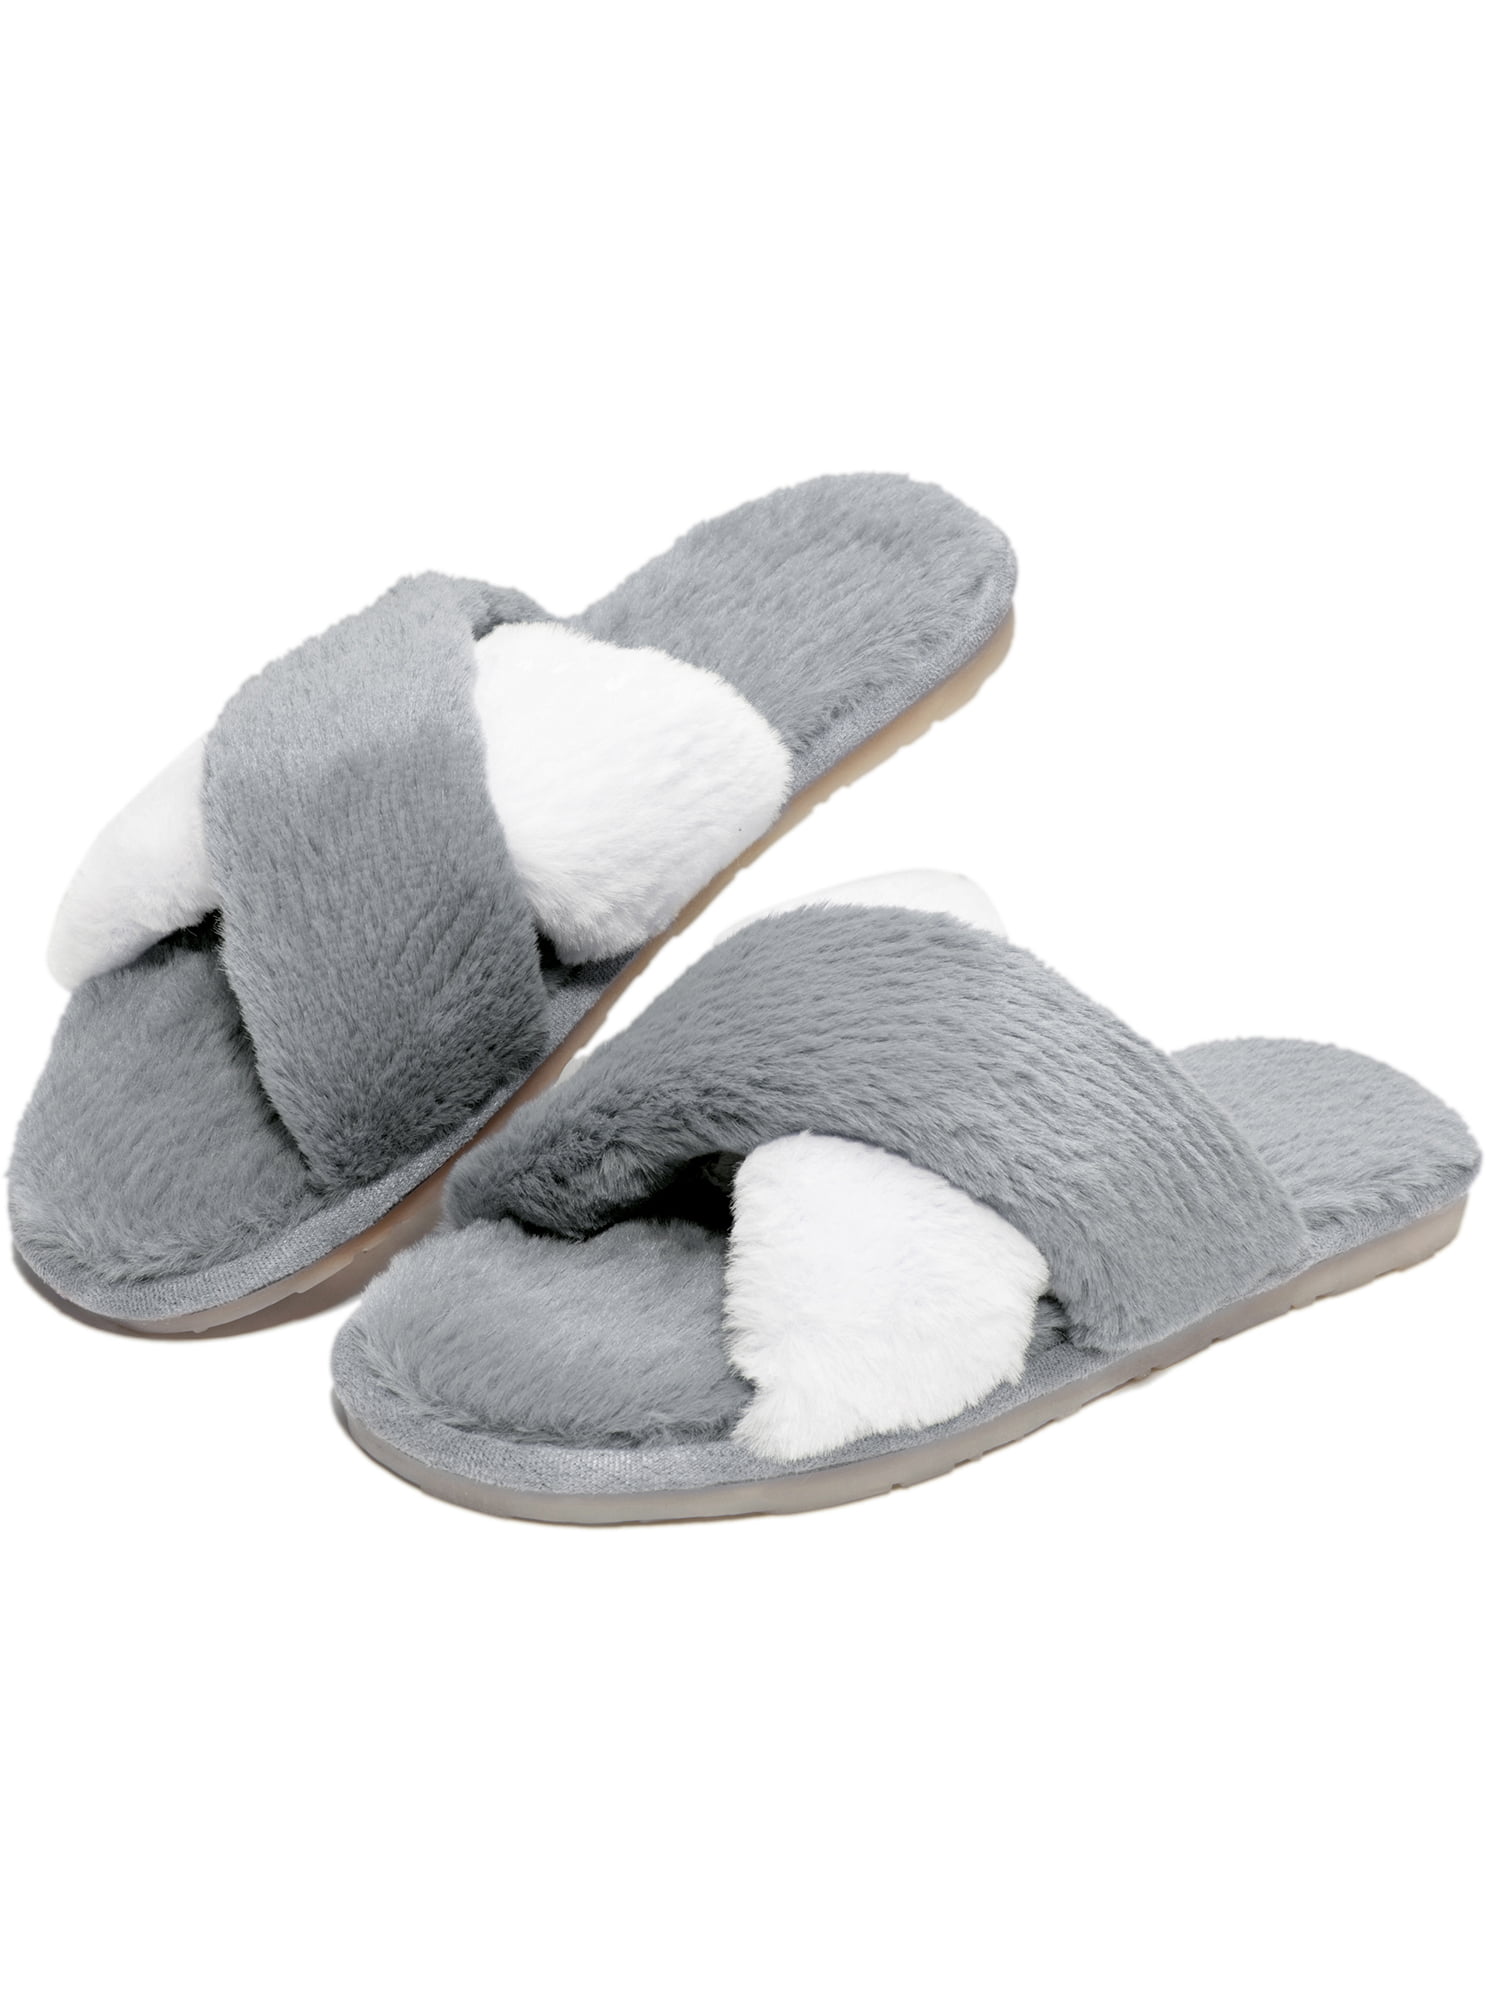 Women's Soft Plush Open Toe House Slippers Comfy Fuzzy Non-Slip Flat Spa Slide Slippers Comfy Slip On Home Shoes Sandals Indoor Outdoor 